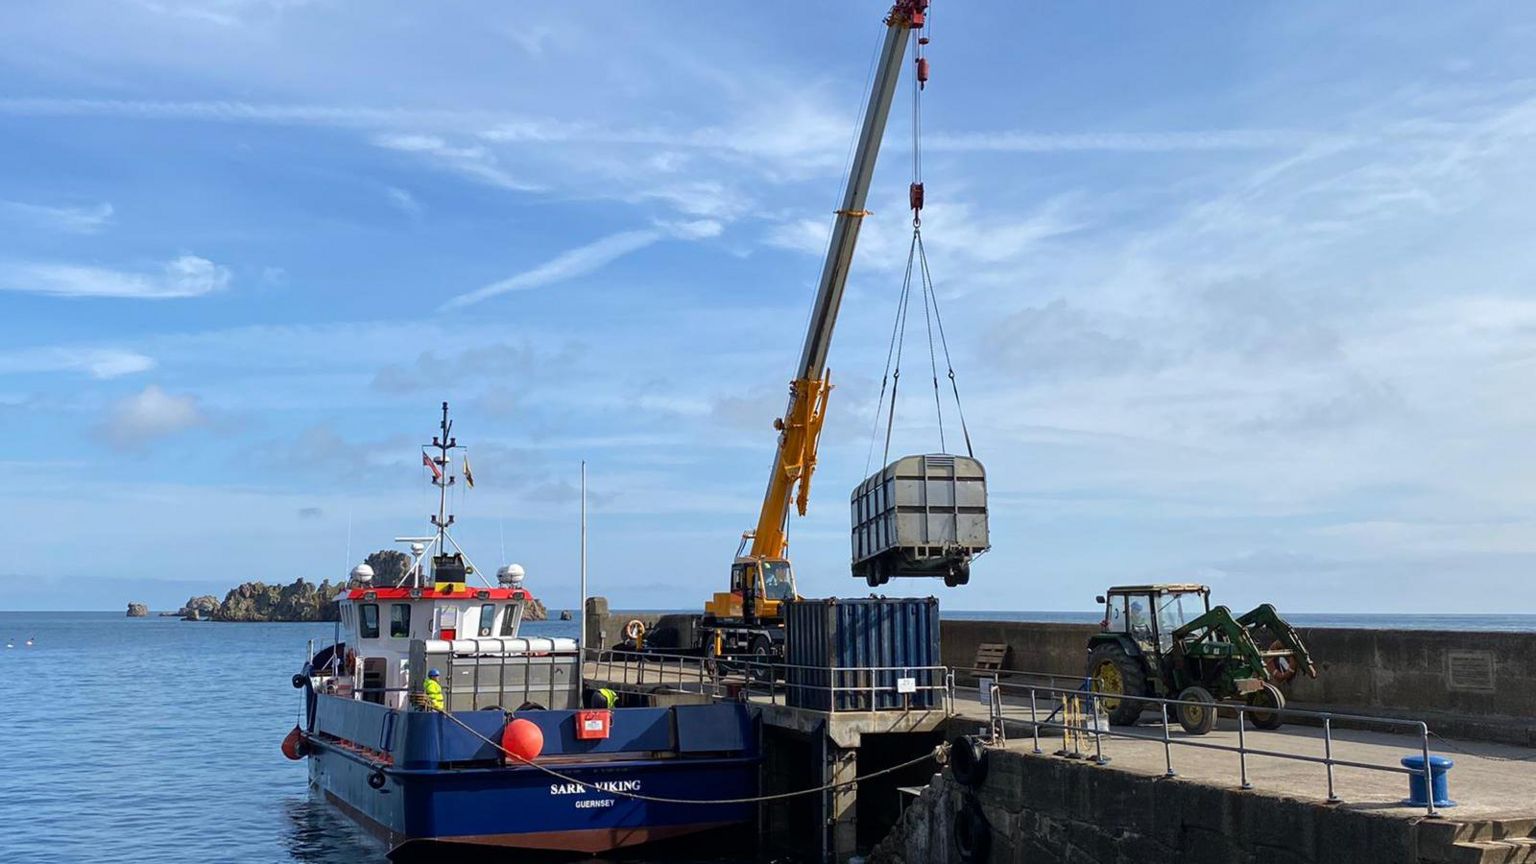 Cows in trailers being lifted off a ferry by crane